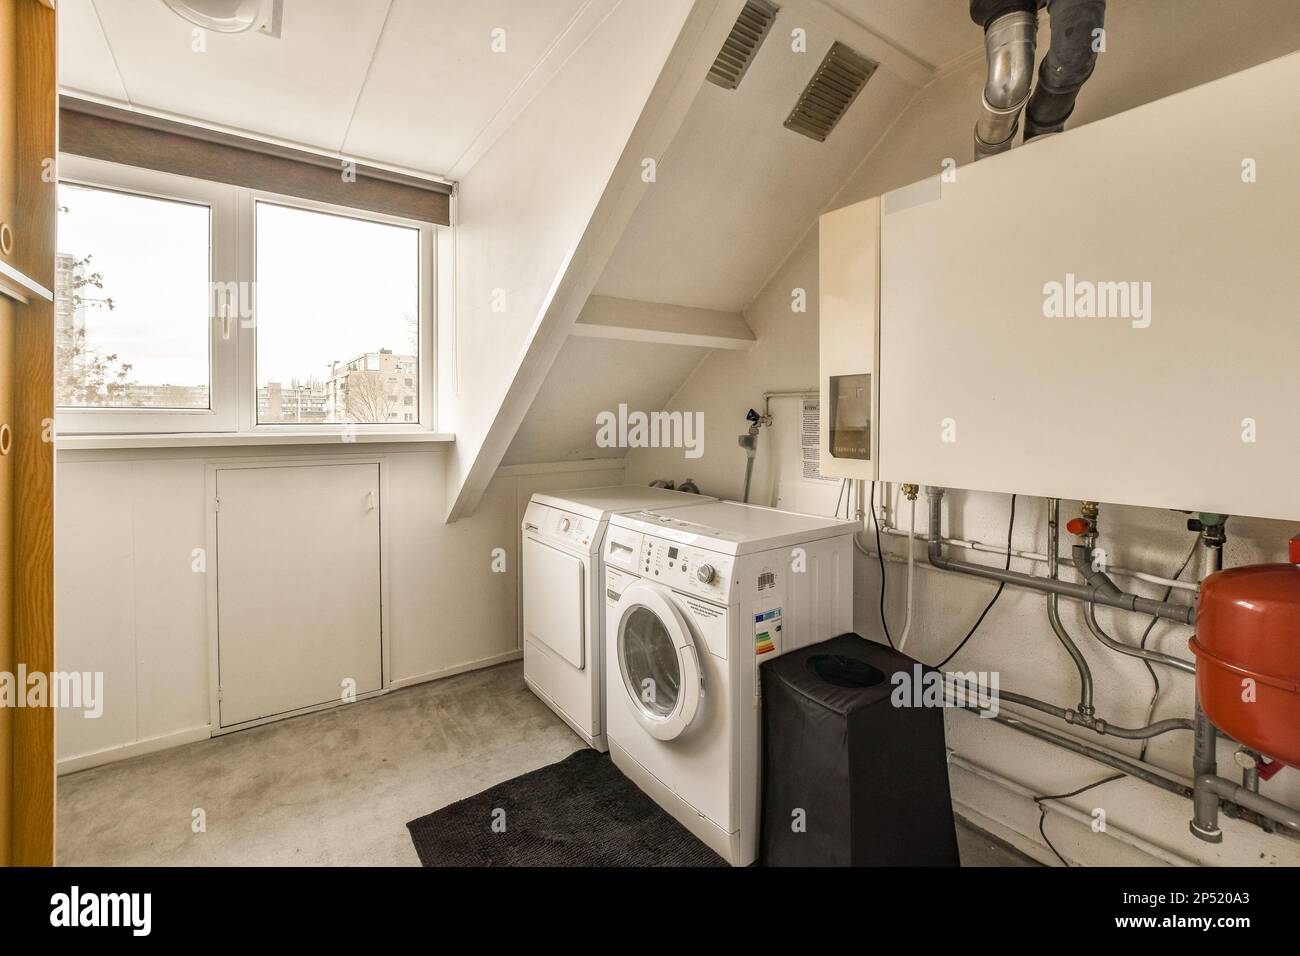 a laundry room with a washer, dryer and washing machine in the corner next  to an open window Stock Photo - Alamy